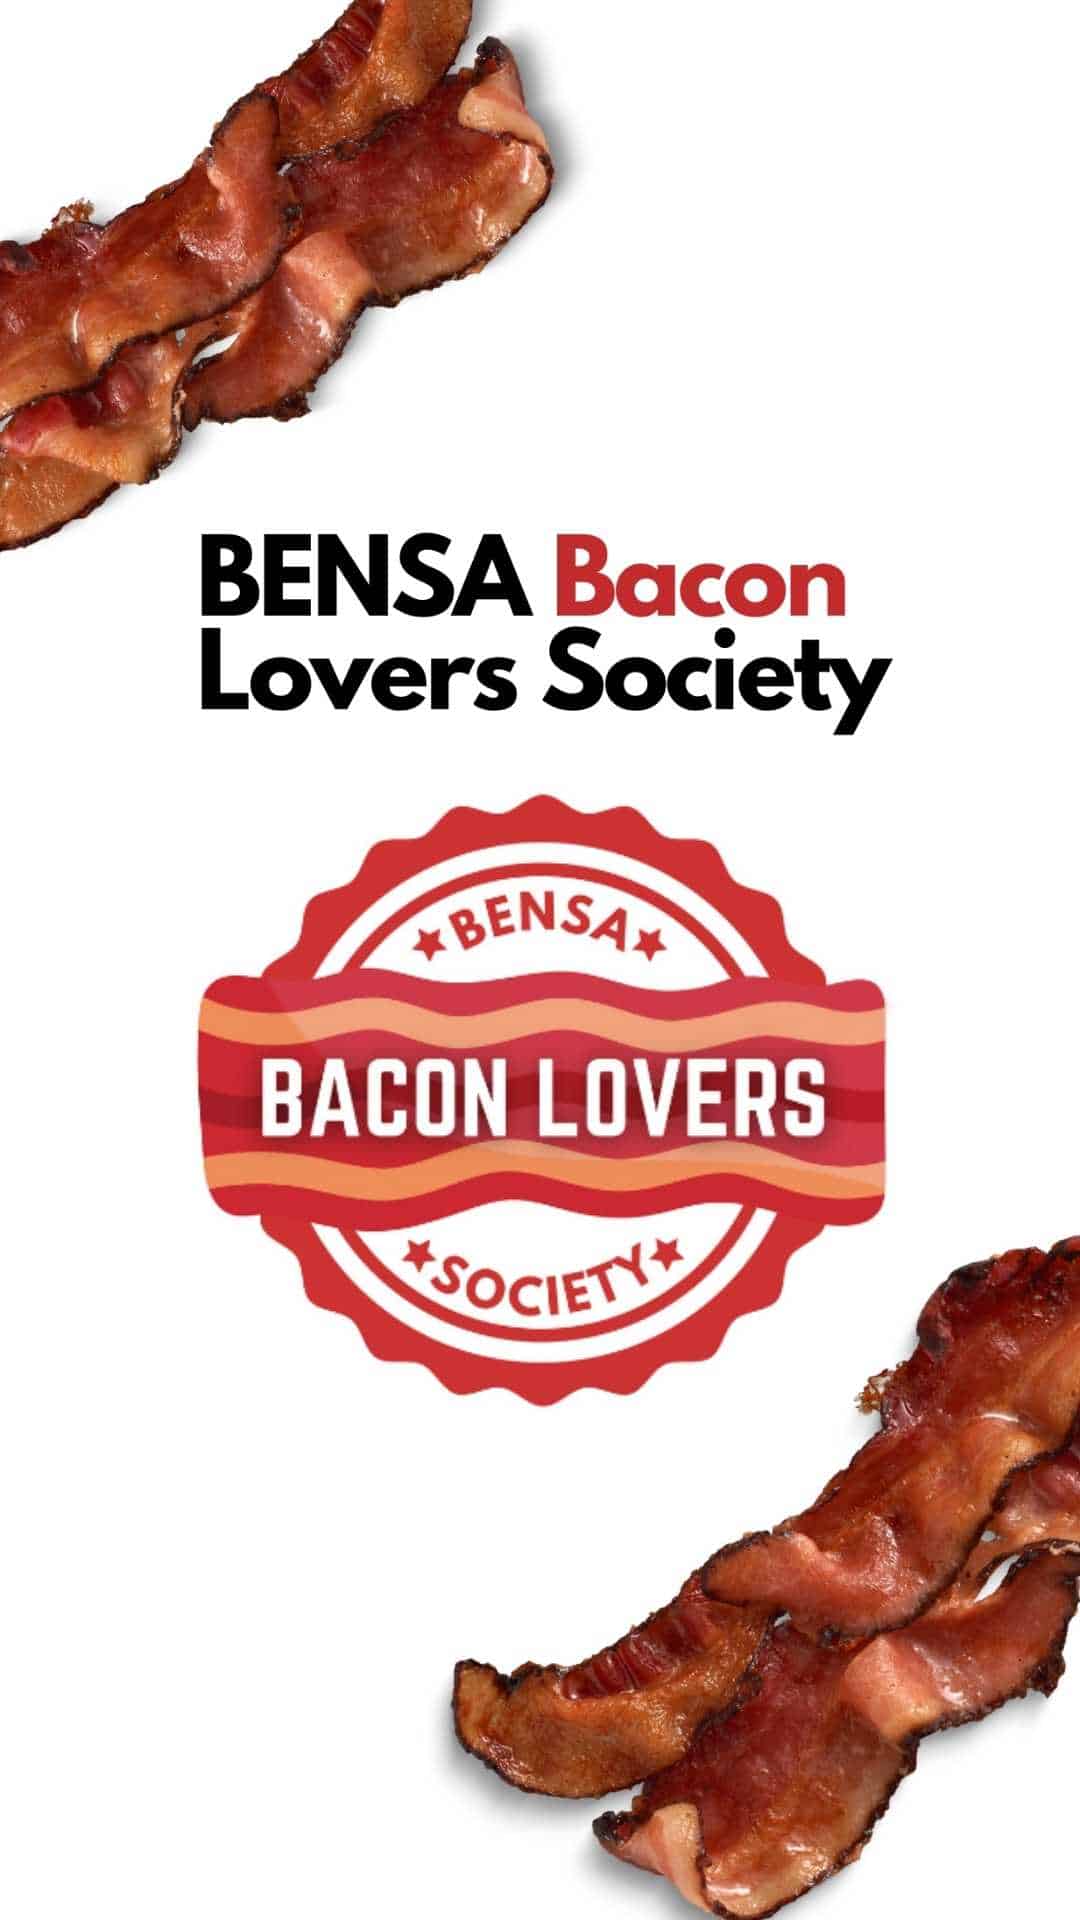 Best Frying Pan for Bacon - BENSA Bacon Lovers Society